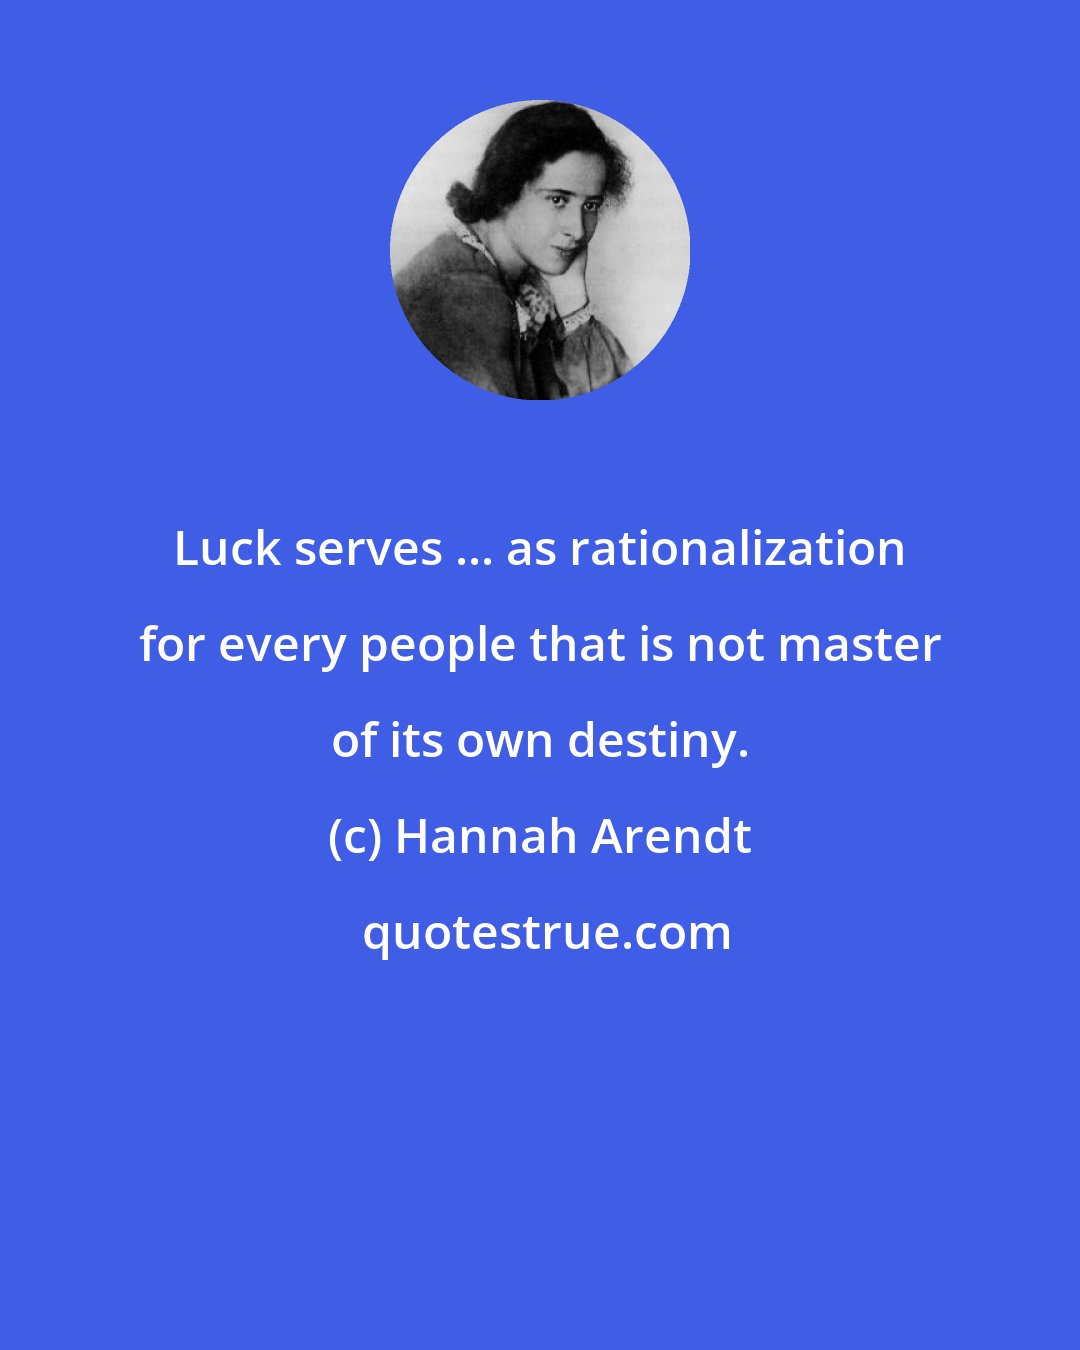 Hannah Arendt: Luck serves ... as rationalization for every people that is not master of its own destiny.